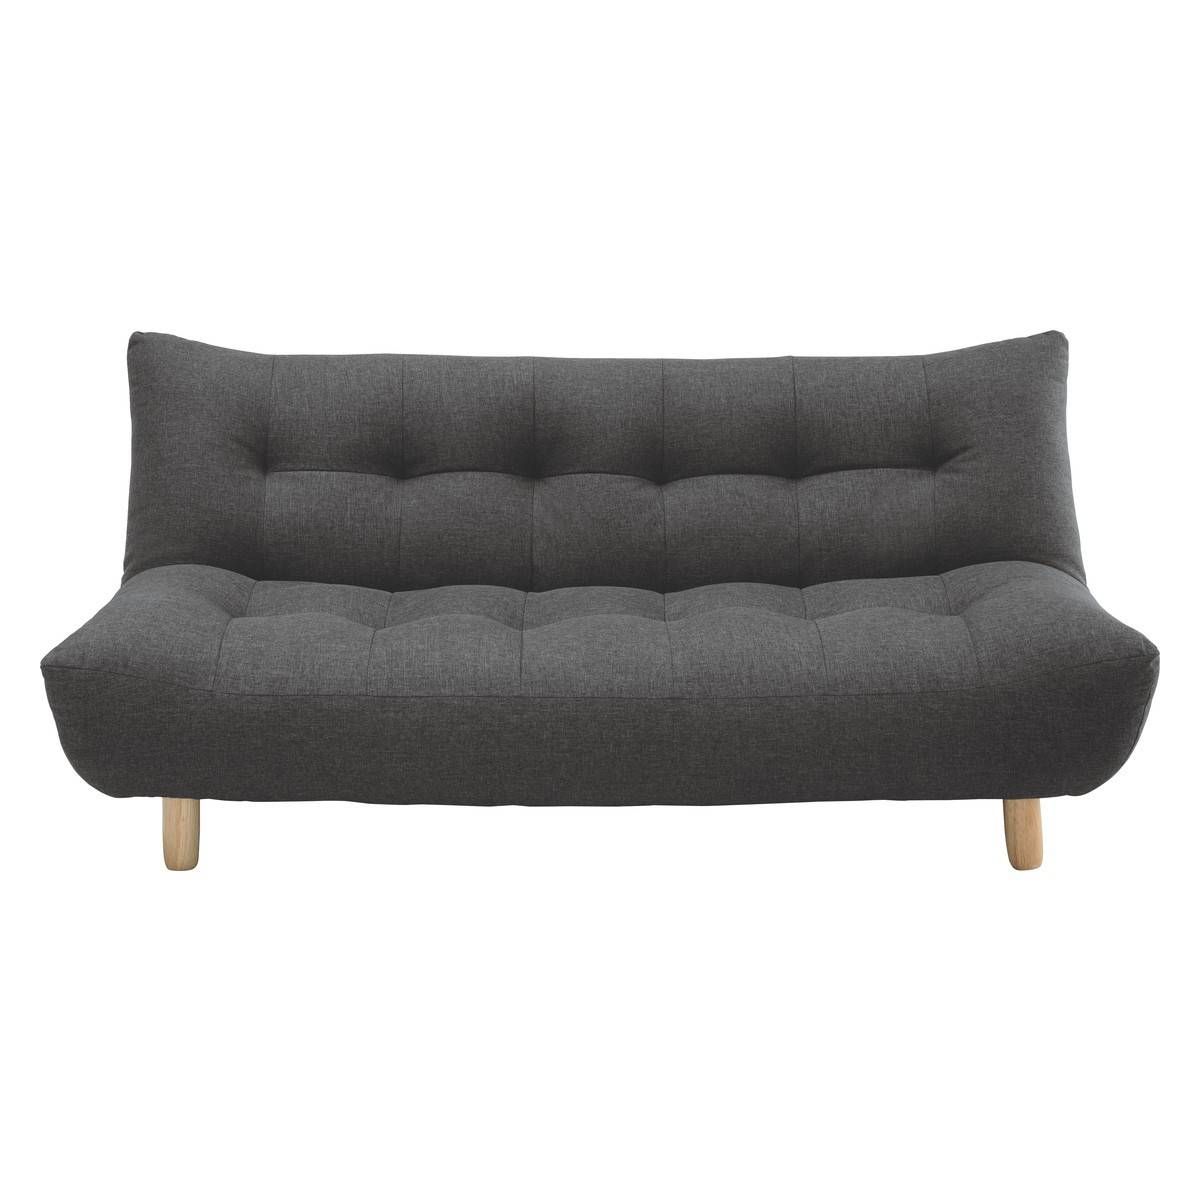 Kota Charcoal Fabric 2 Seater Sofa Bed | Buy Now At Habitat Uk For Sofa Beds (View 13 of 15)